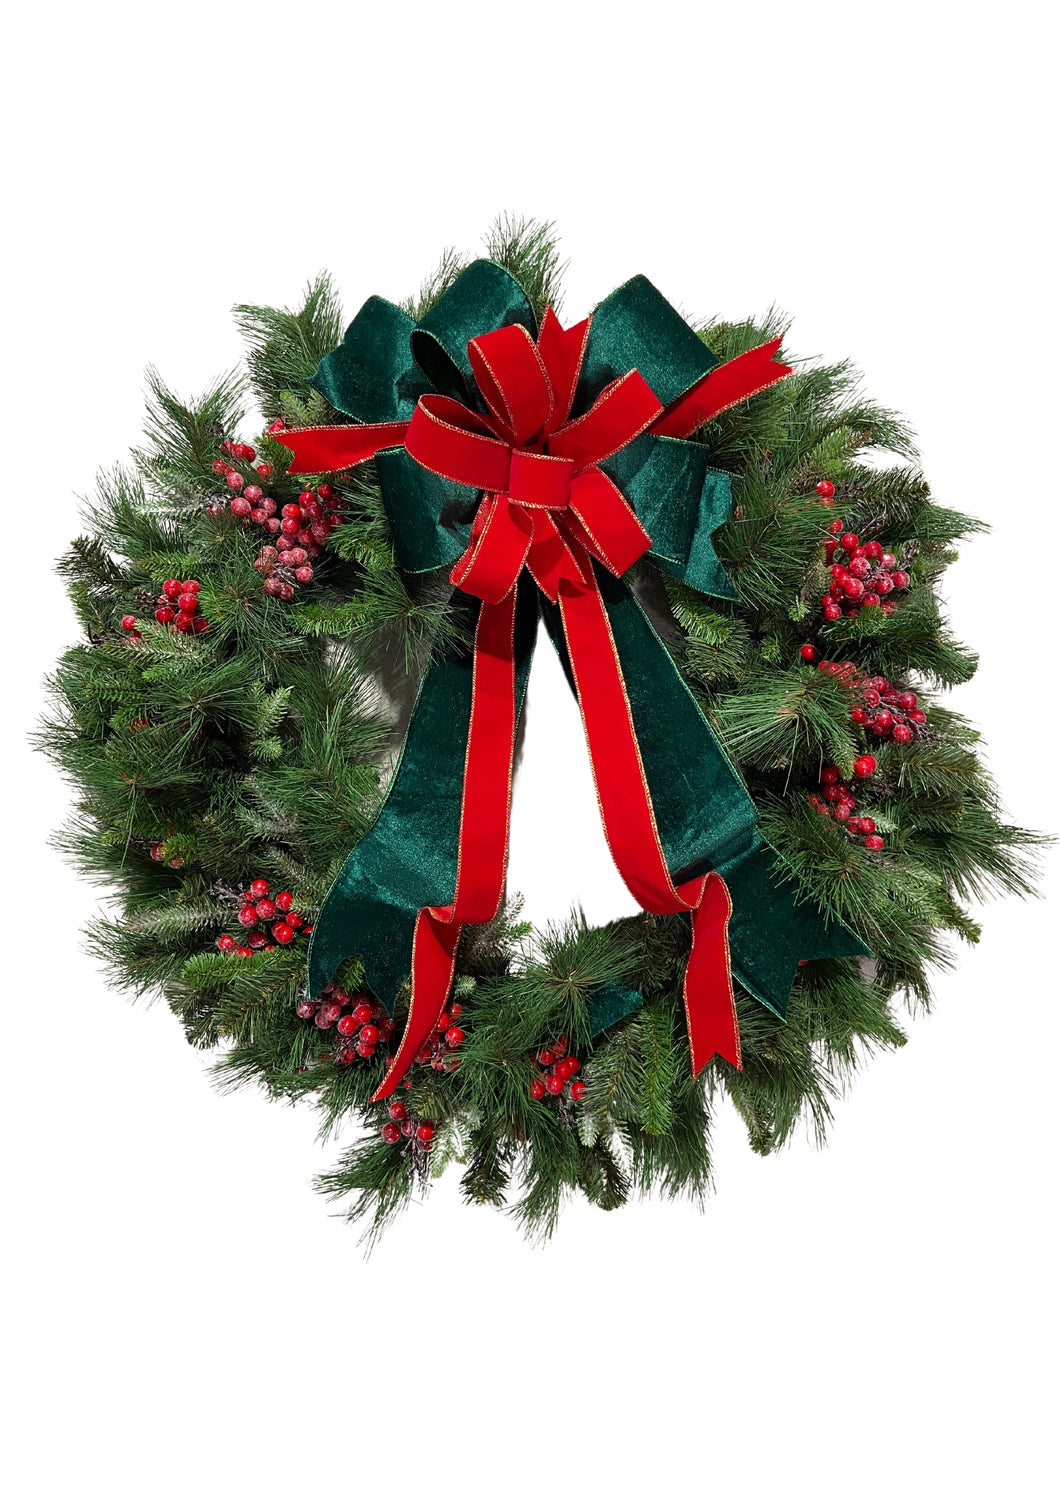 90cm Traditional Wreath w/ Red & Green Bow